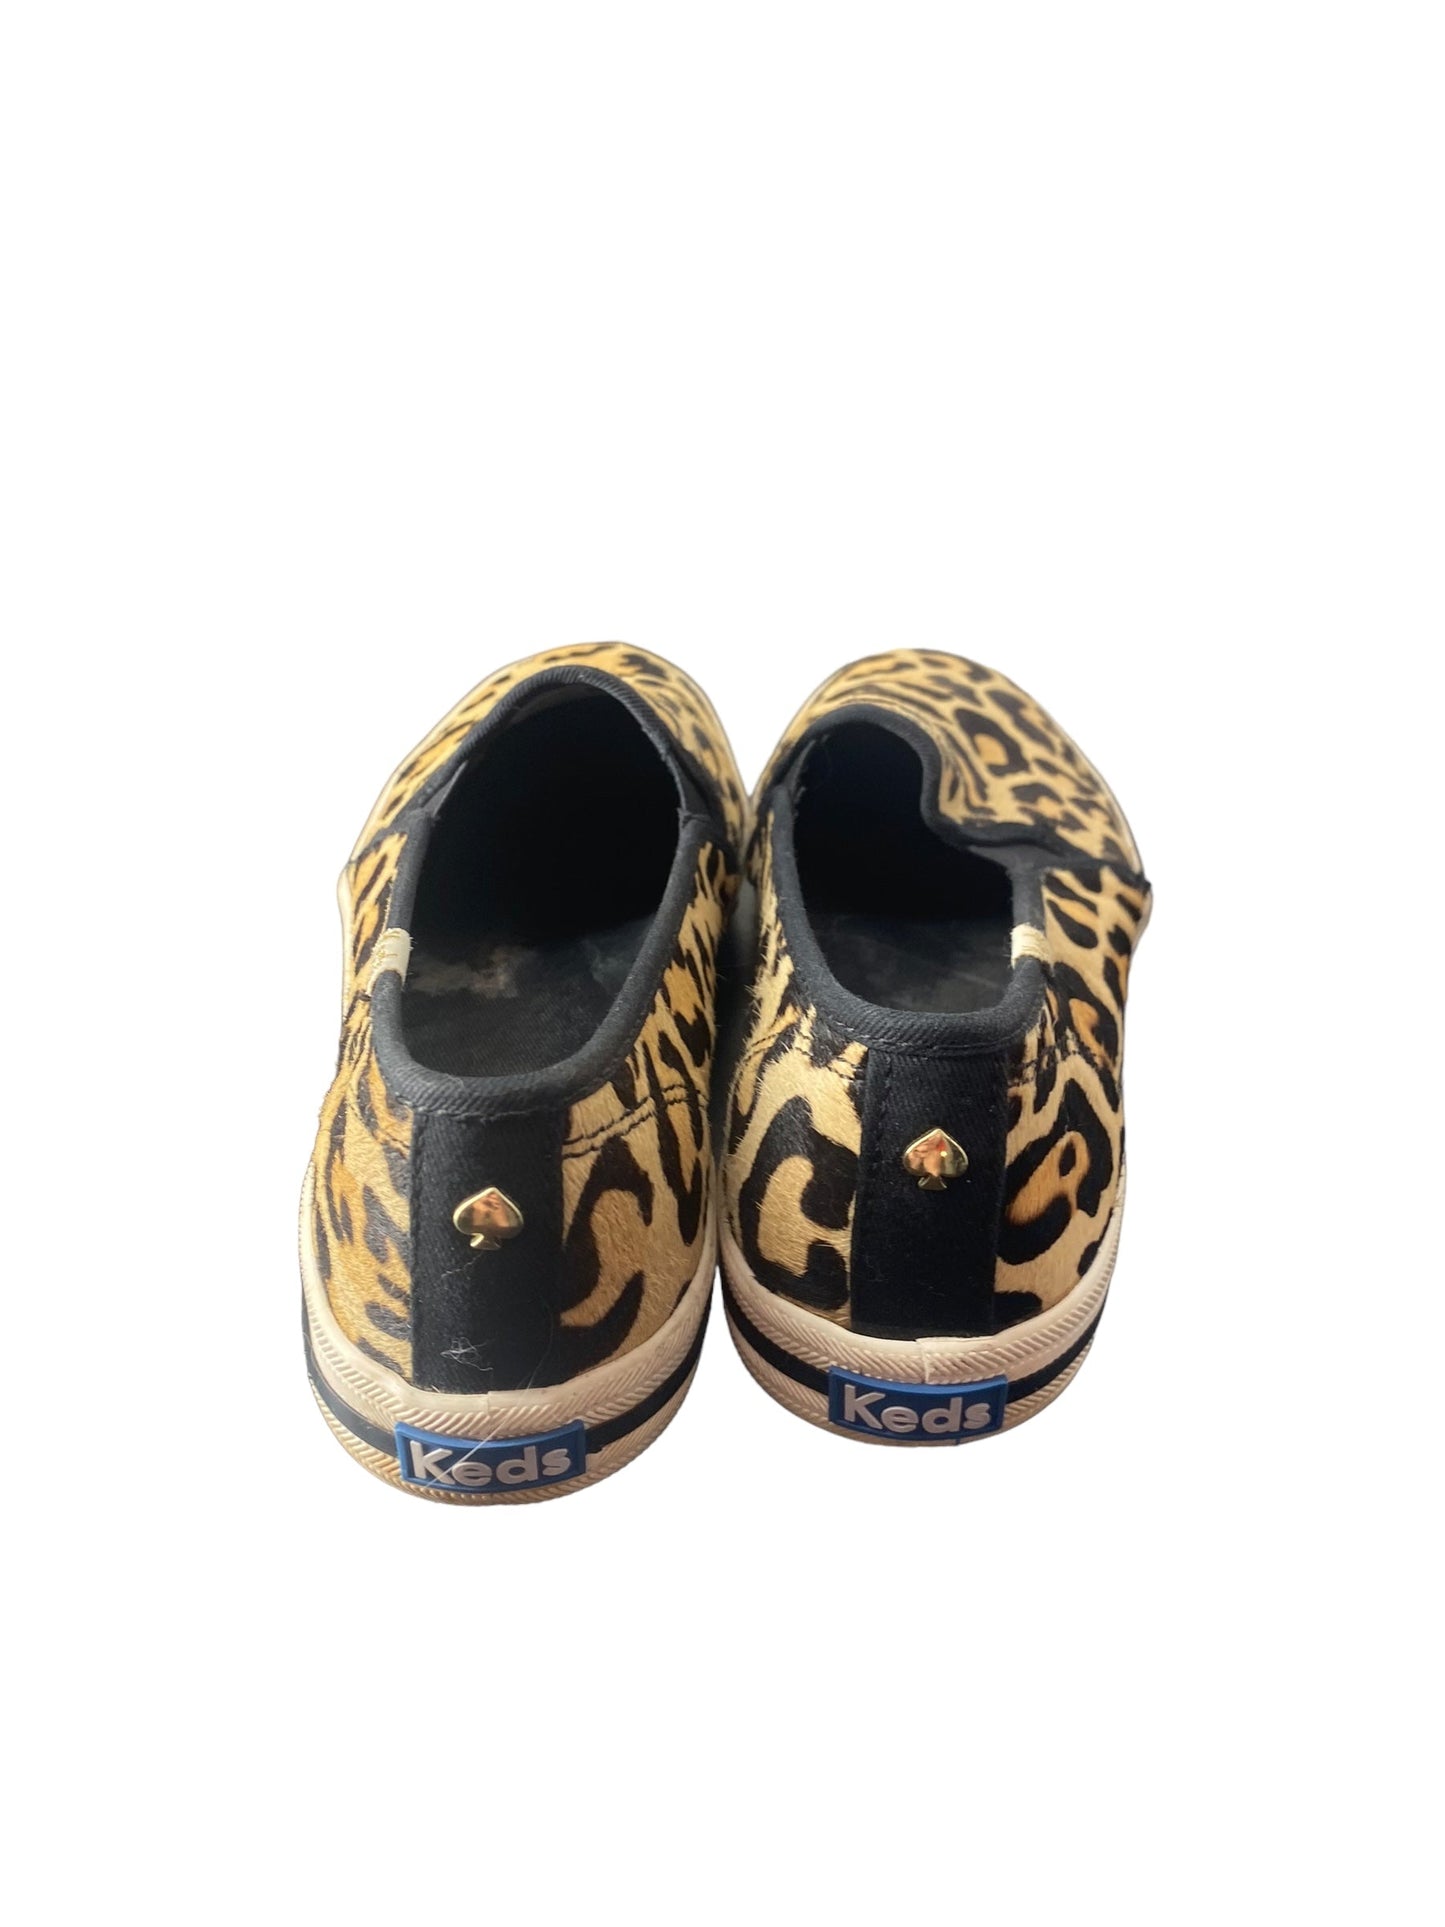 Animal Print Shoes Sneakers Kate Spade, Size 6.5